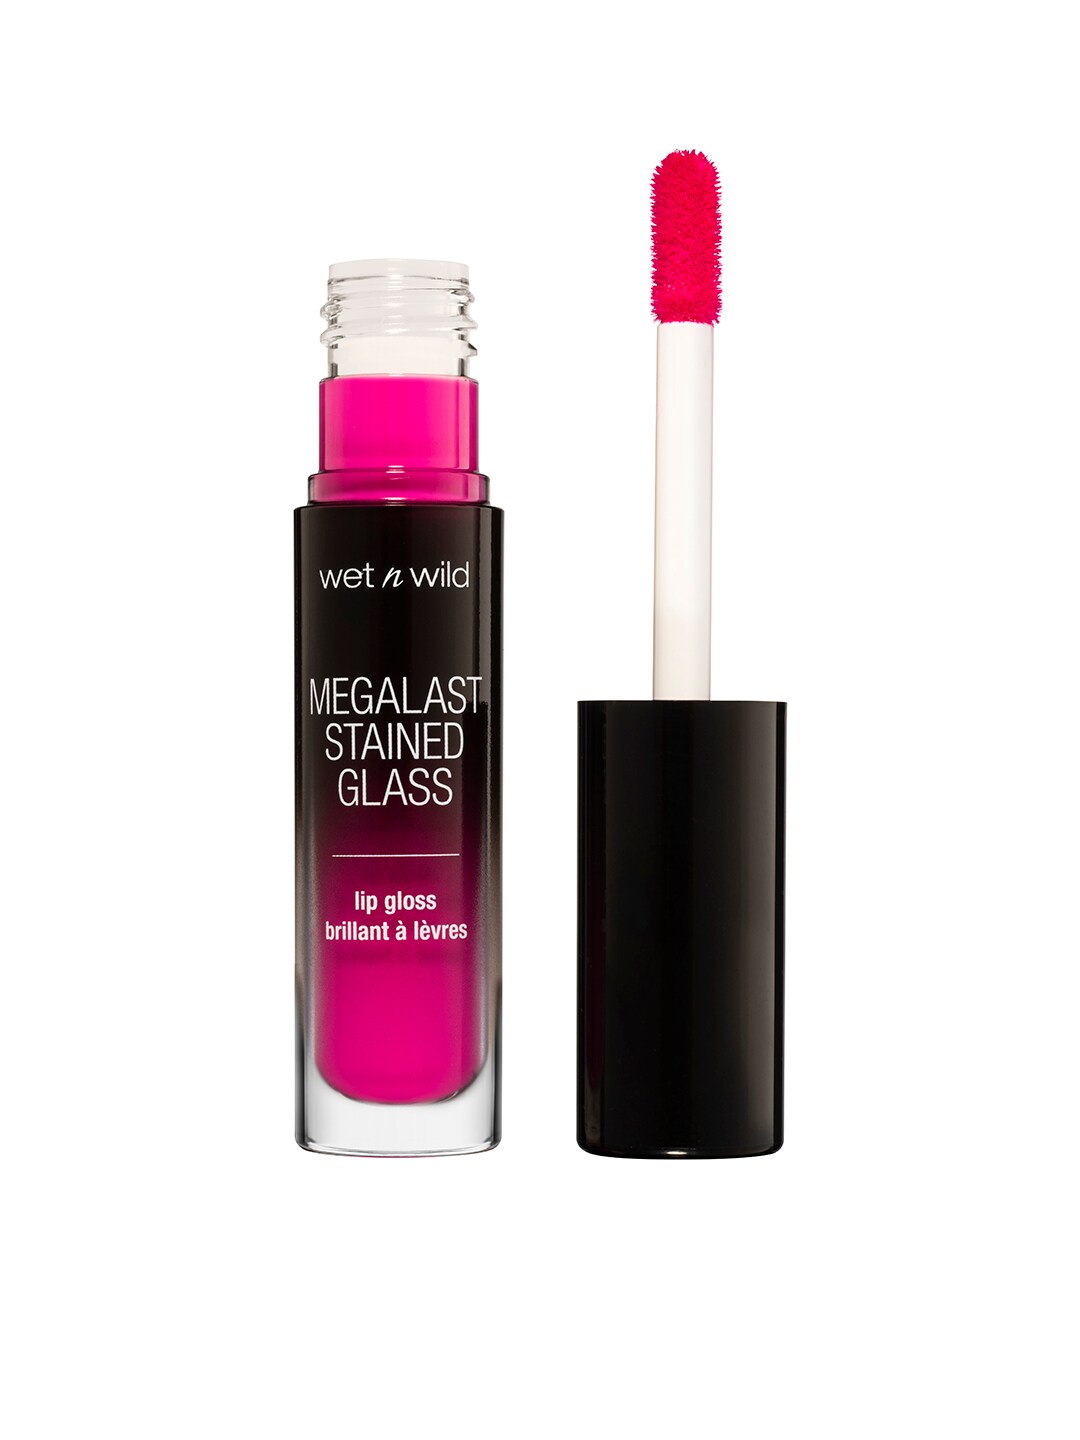 Wet n Wild Megalast Stained Glass Lip Gloss - Kiss My Glass 1111447E 2.5 g Price in India